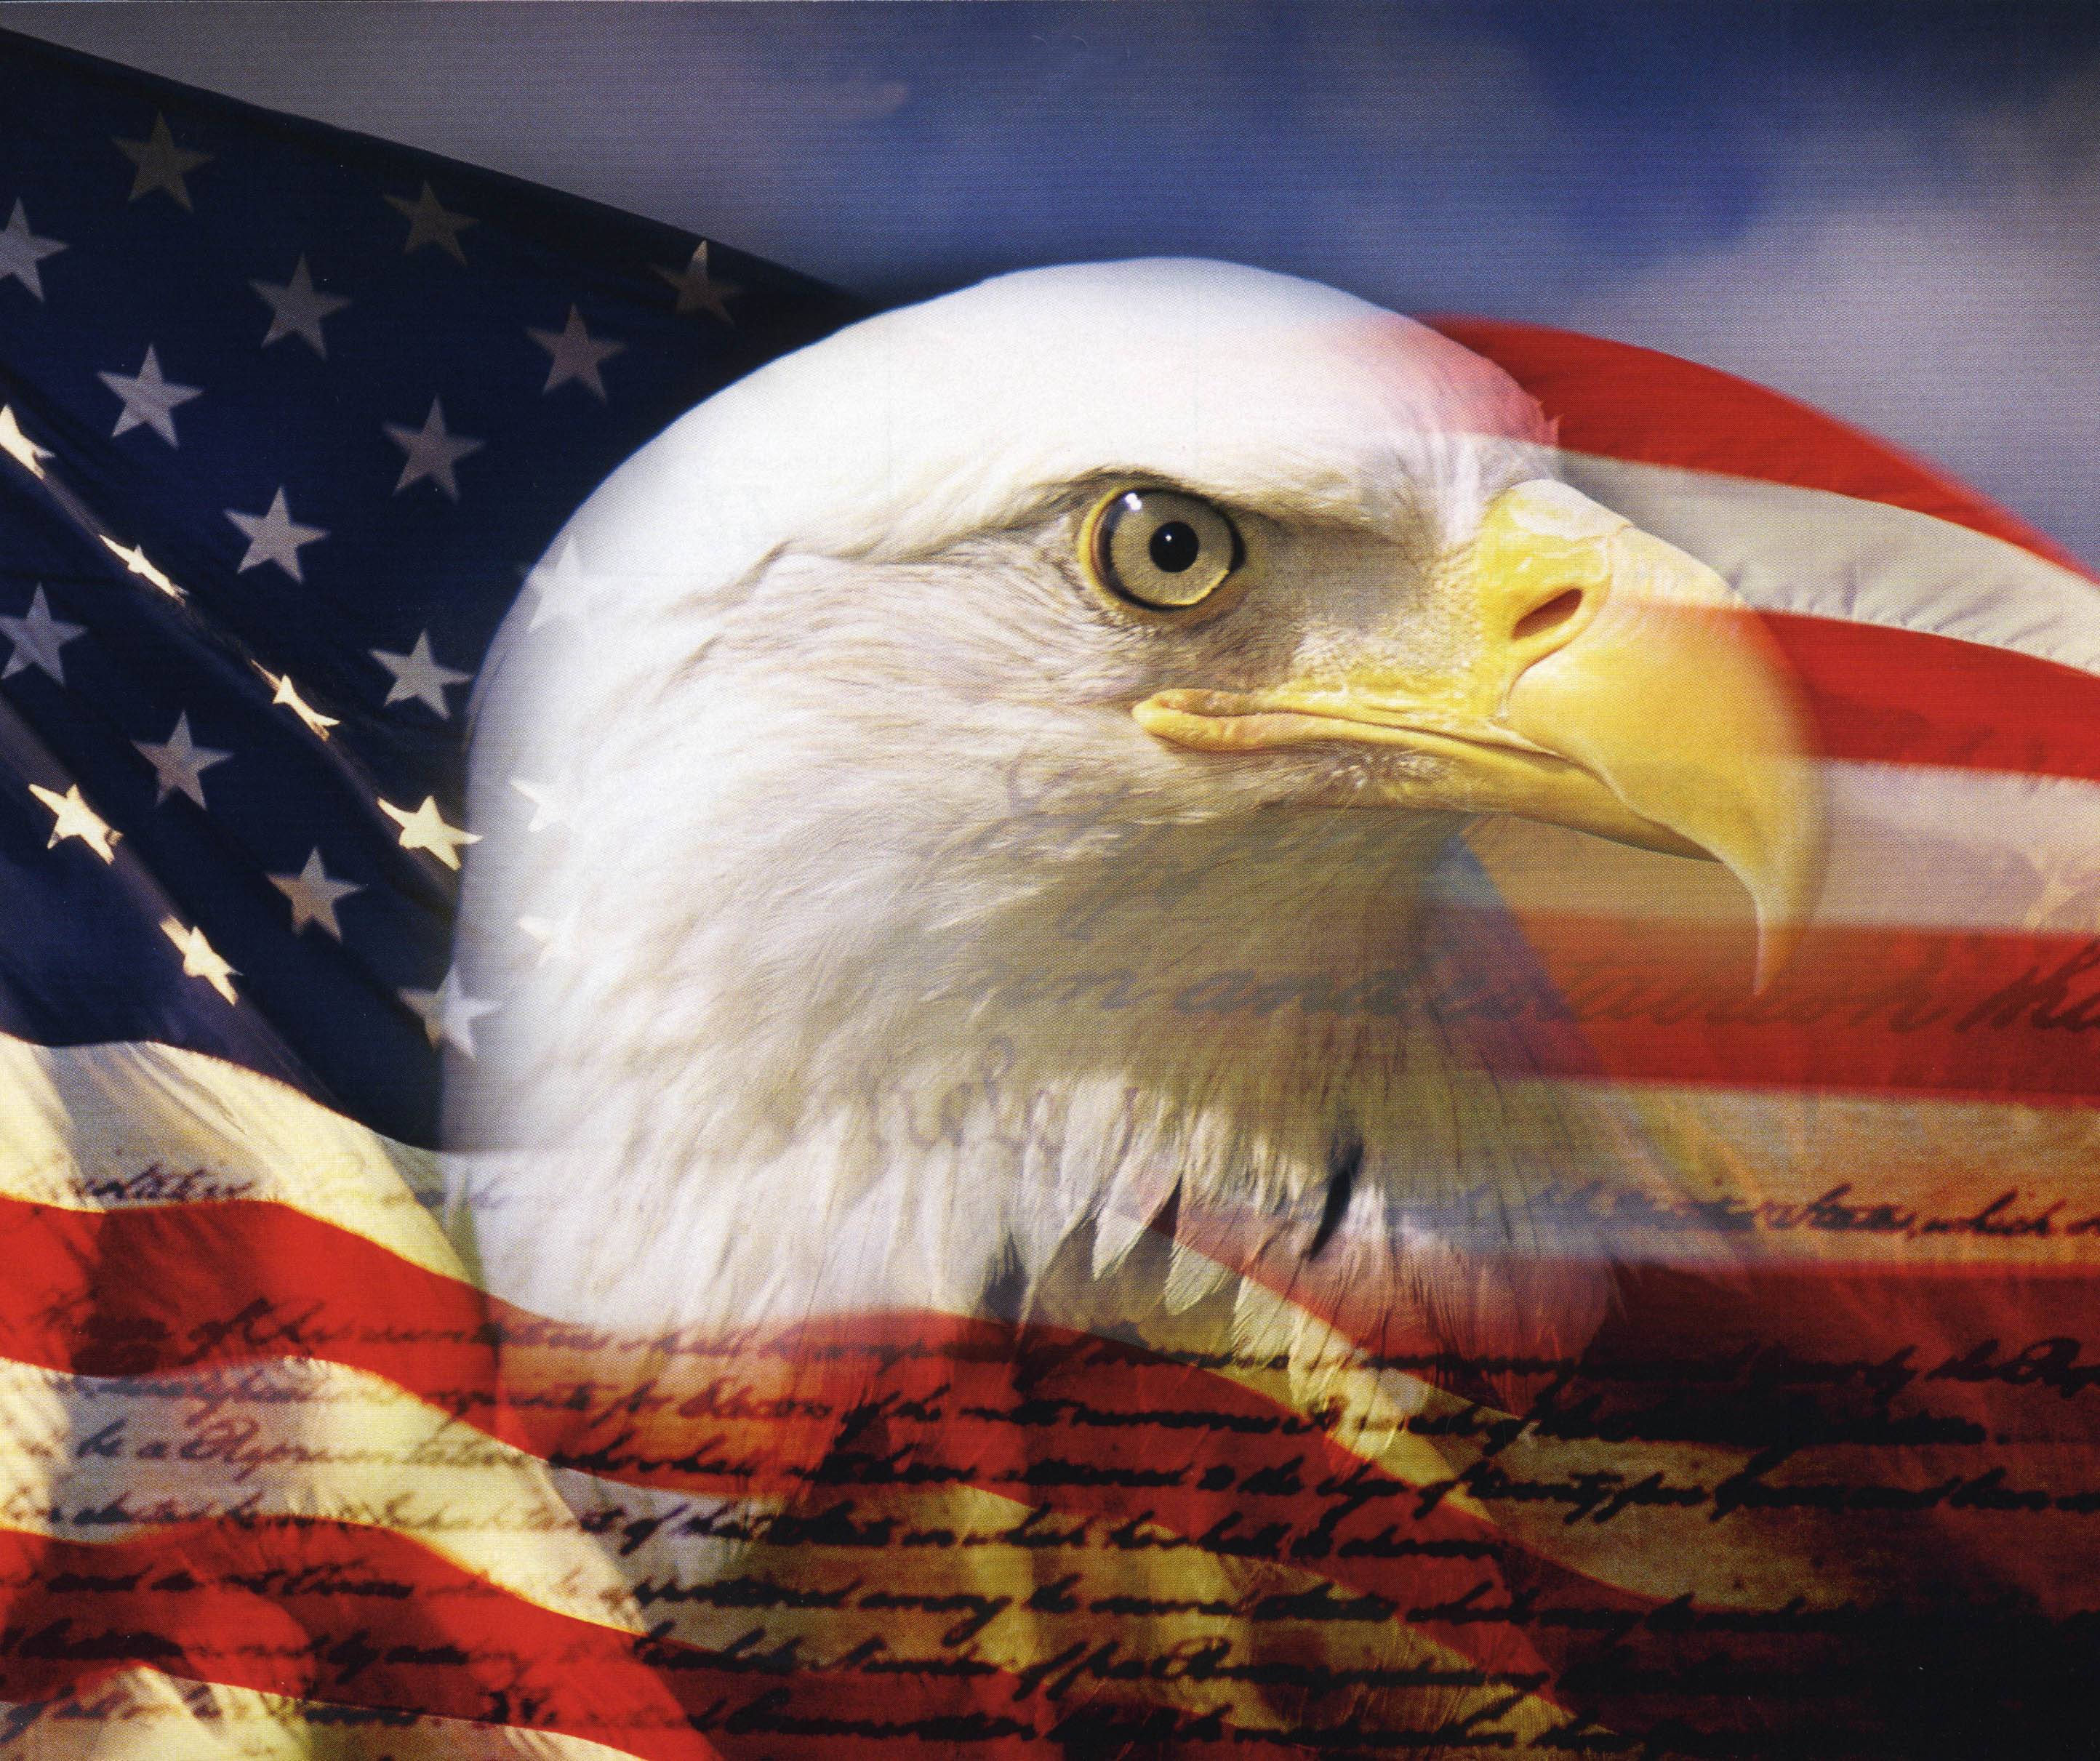 High Quality Desktop Wallpaper Of Usa Country Flags With Eagle Head